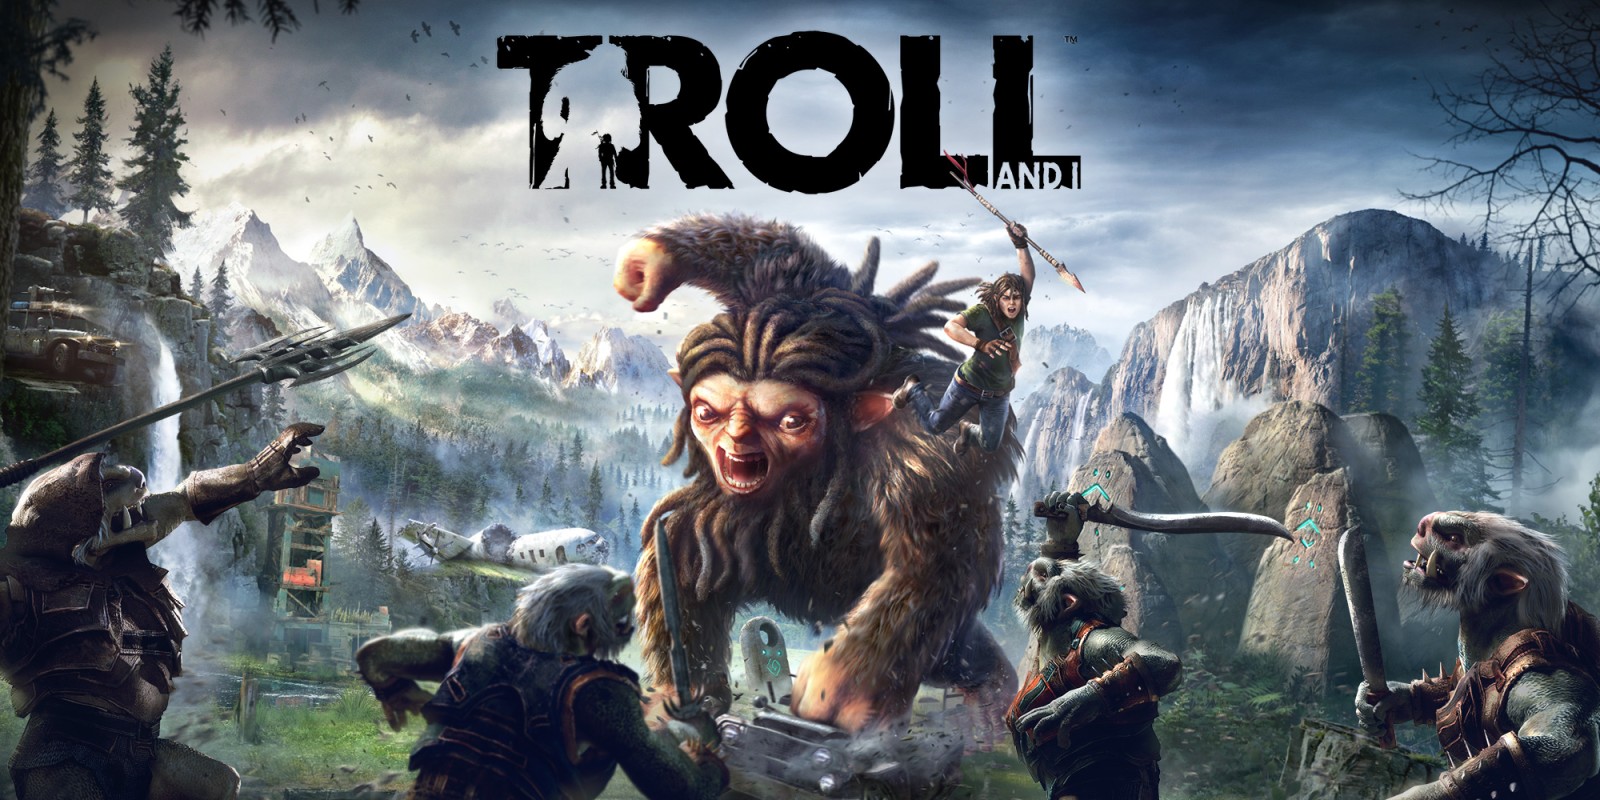 Troll and I para Nintendo Switch solo 3,4€